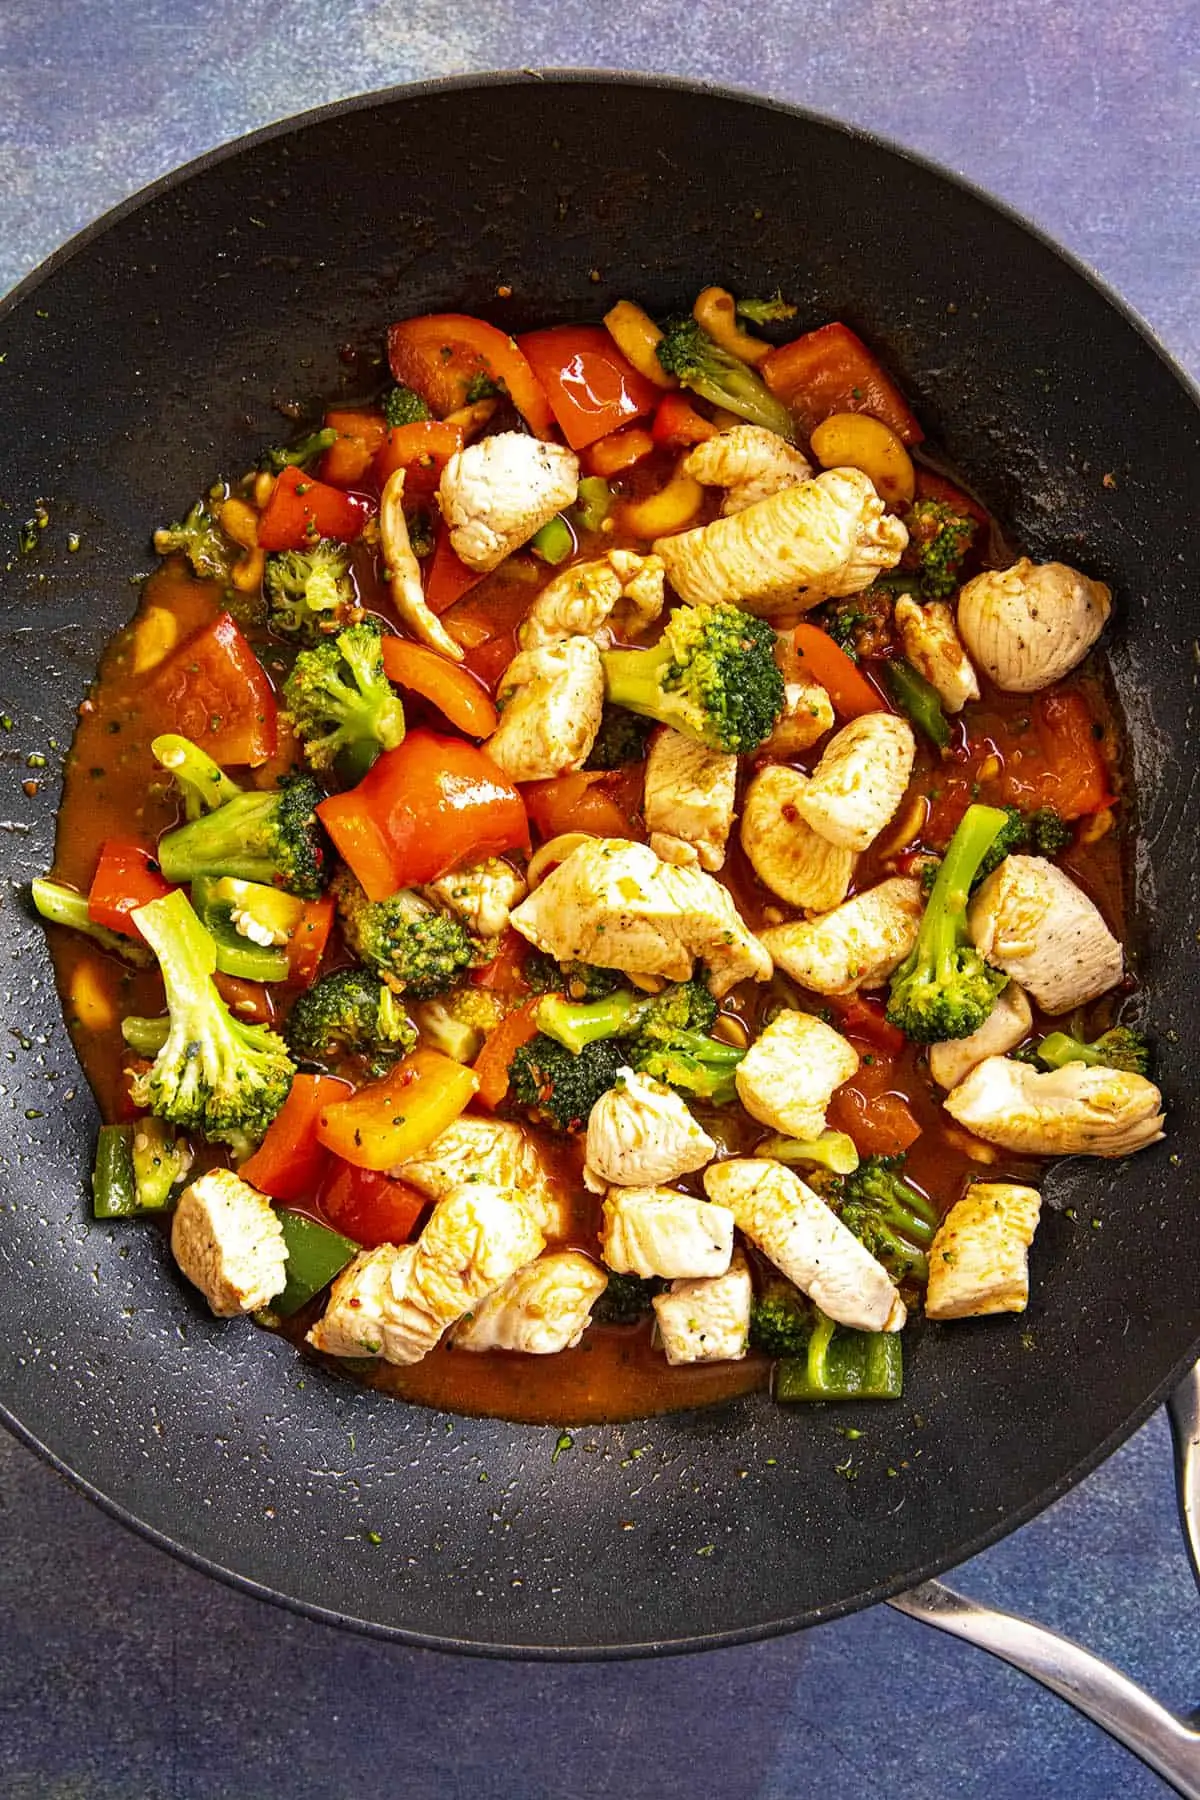 Mixing together chicken, vegetables and stir fry sauce in a hot pan